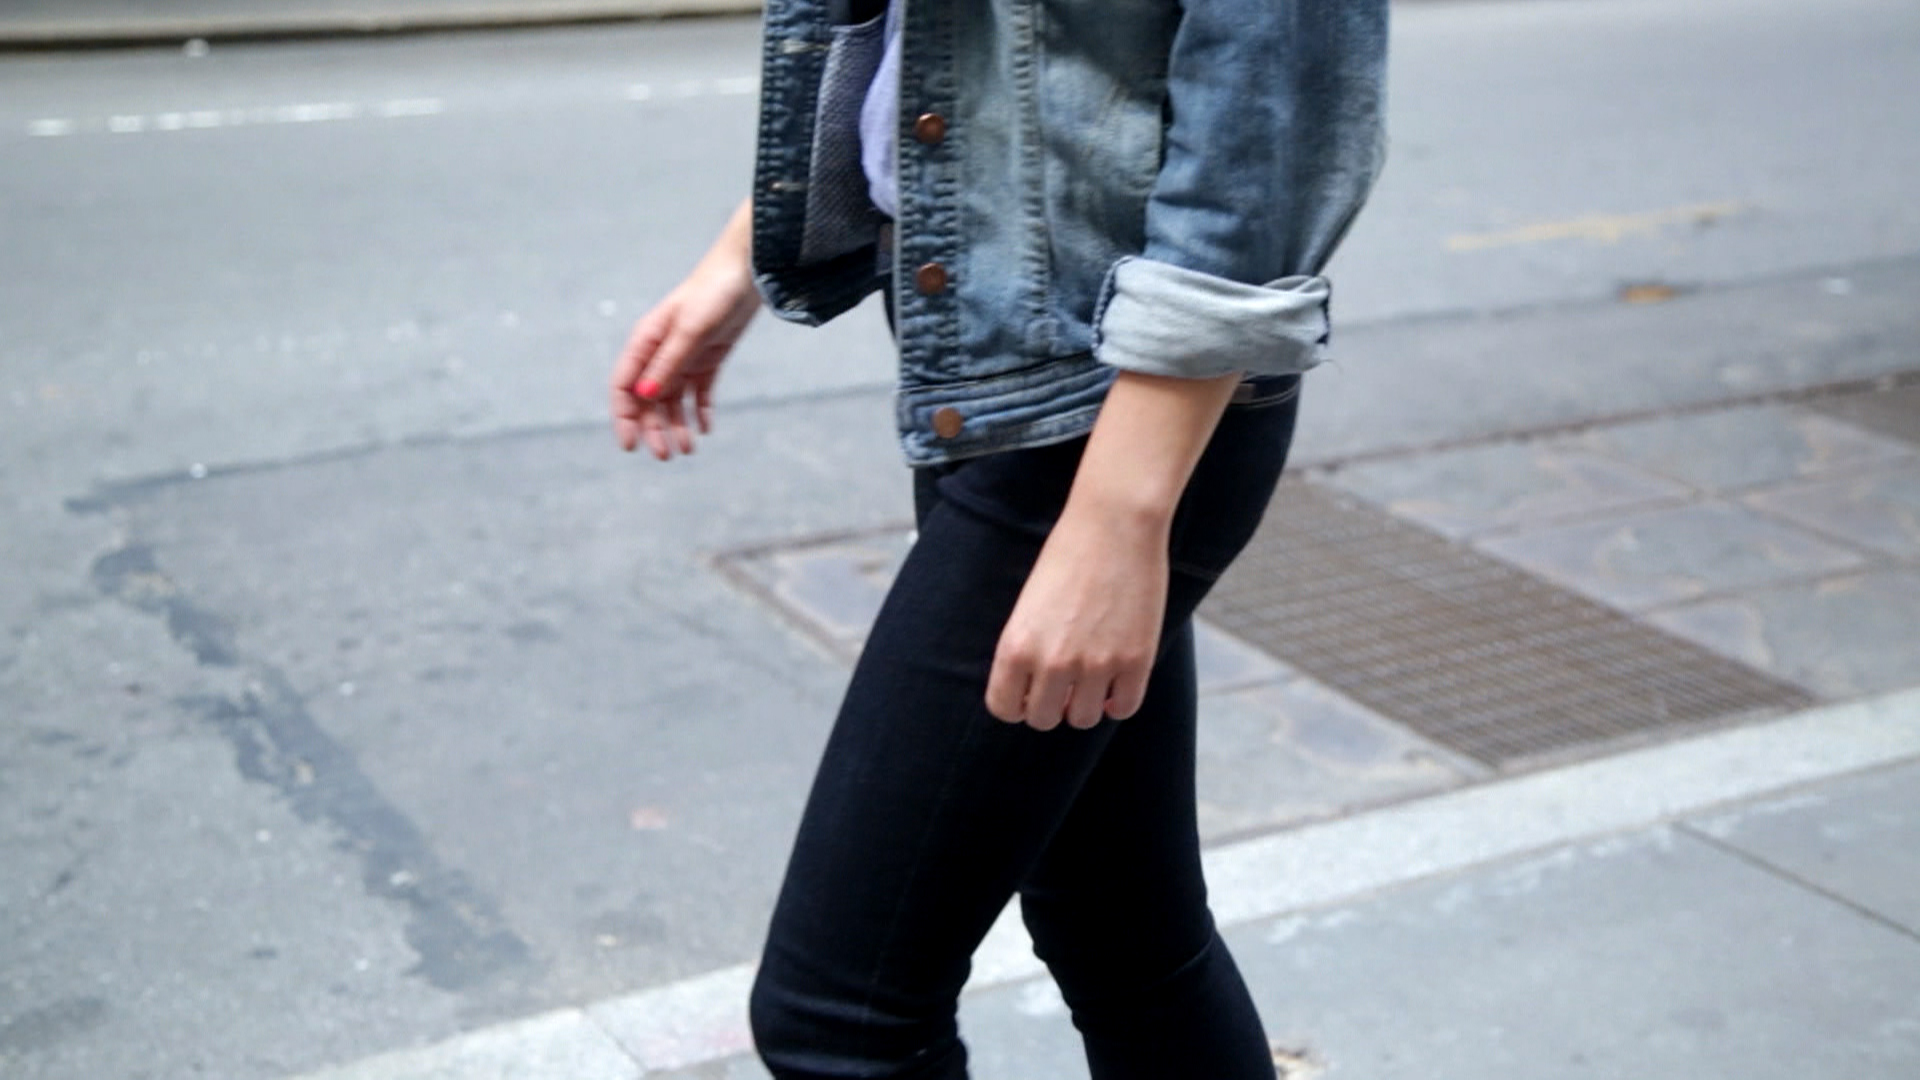 The scary proof that skinny jeans should come with a health